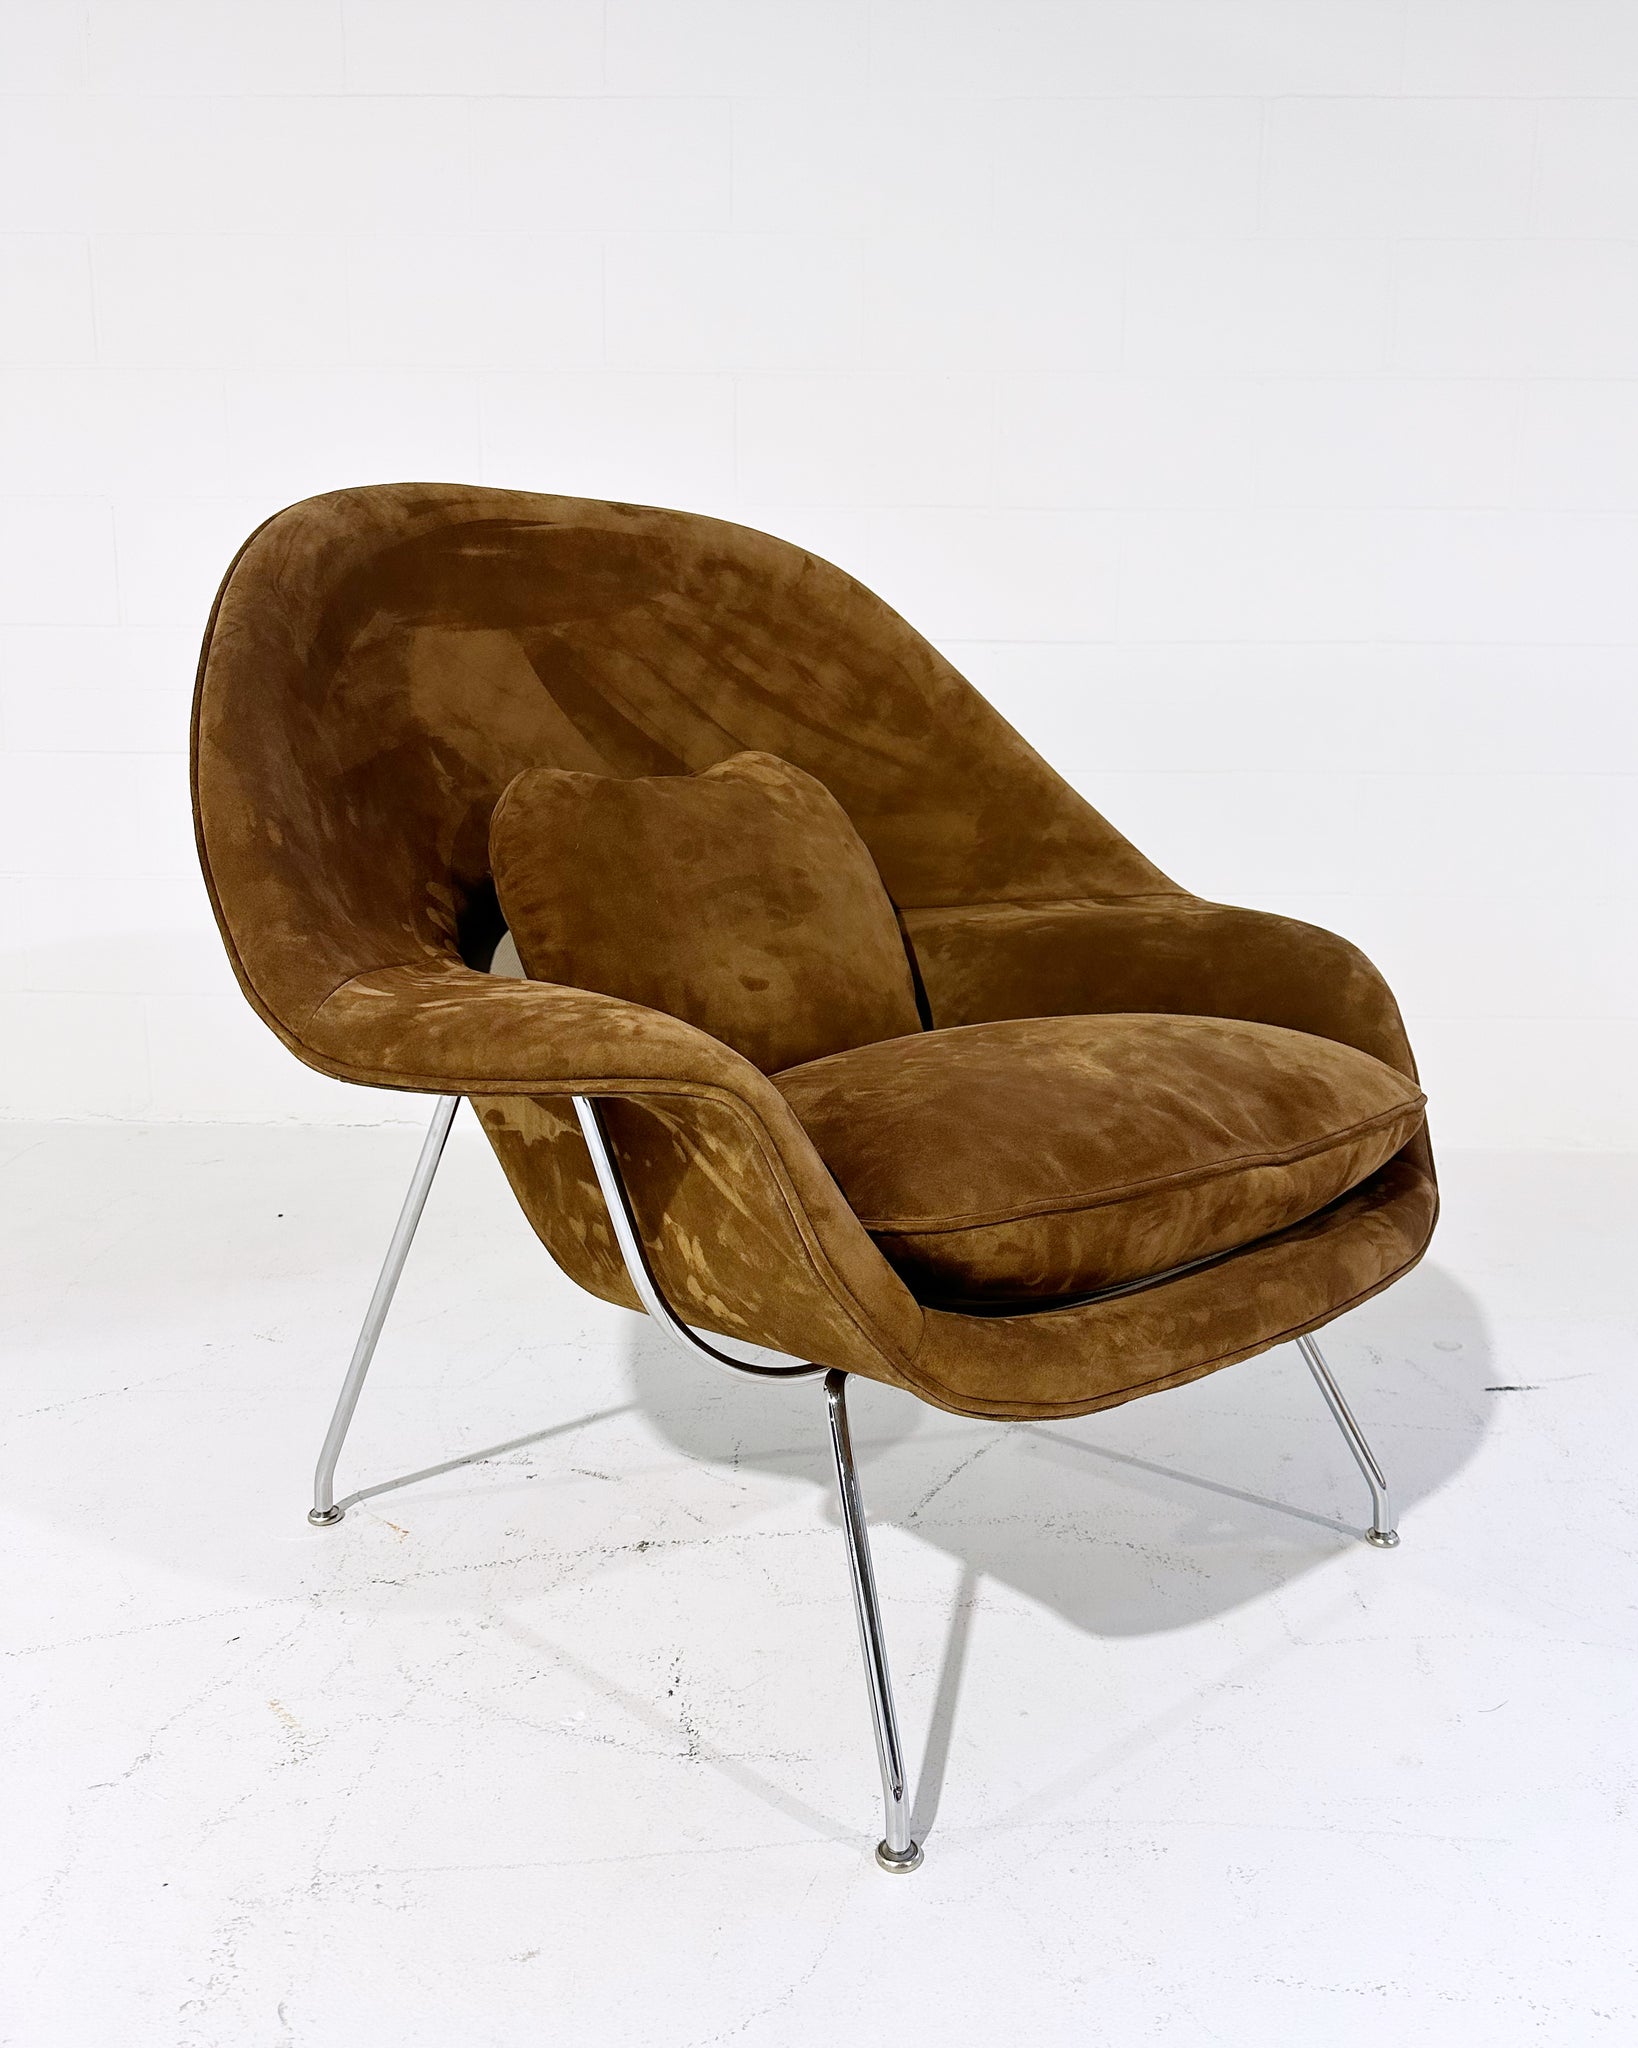 Bespoke Womb Chair and Ottoman in Suede